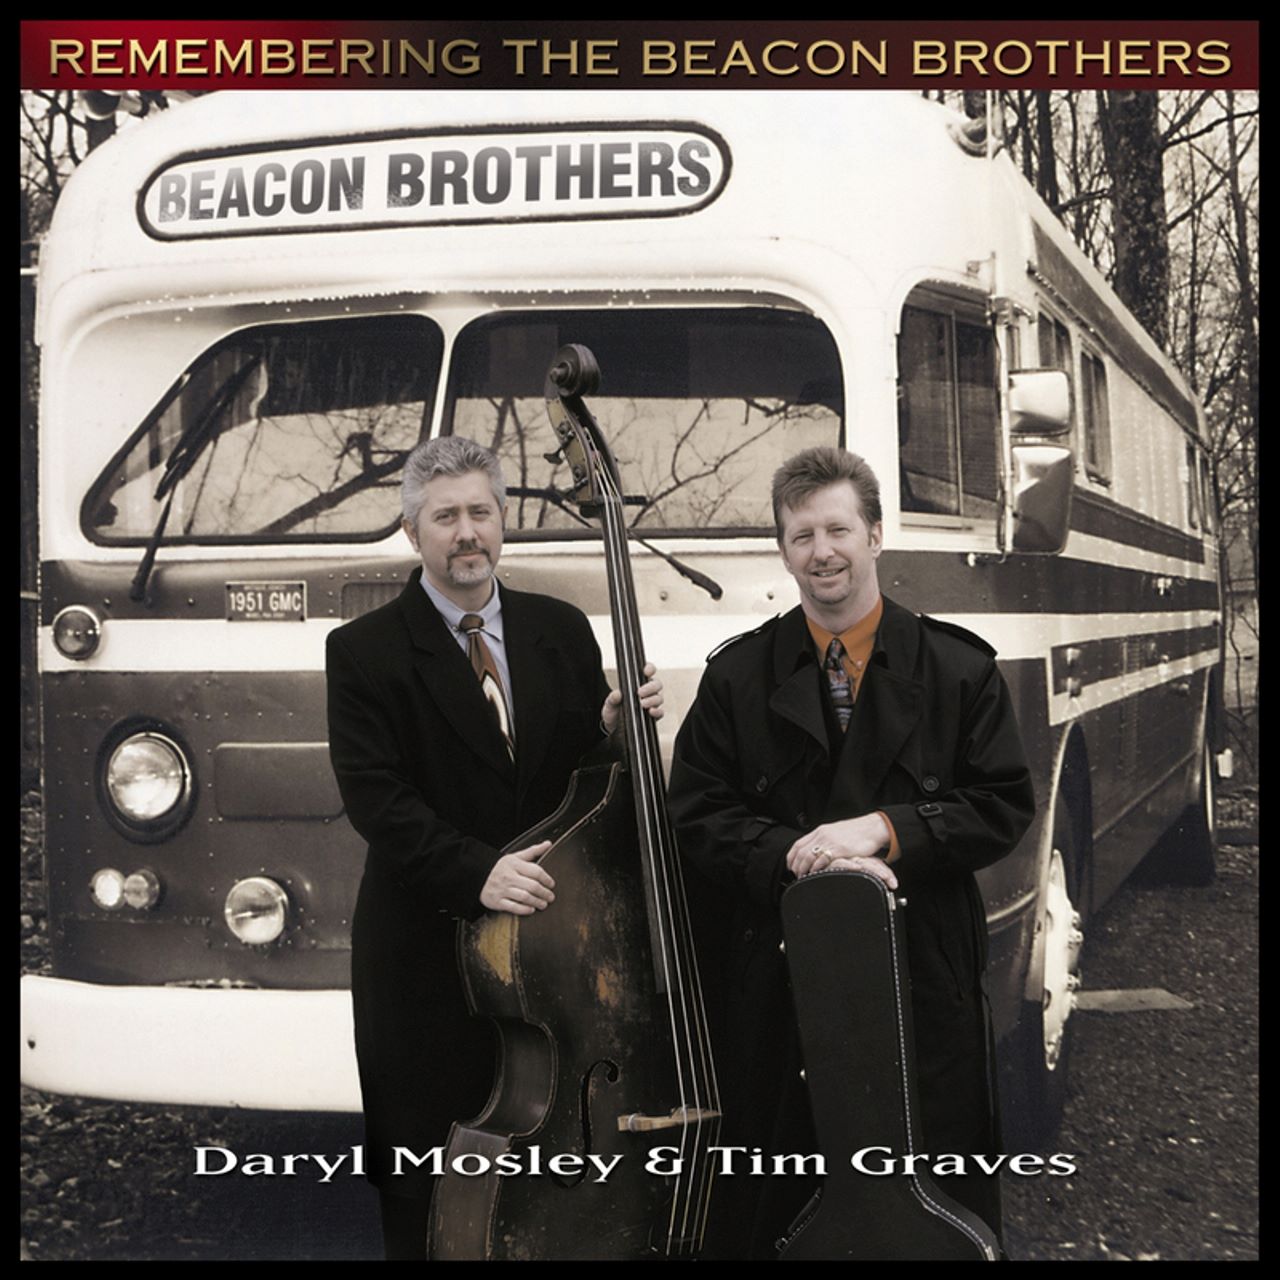 Daryl Mosley & Tim Graves - Remembering The Beacon Brothers cover album